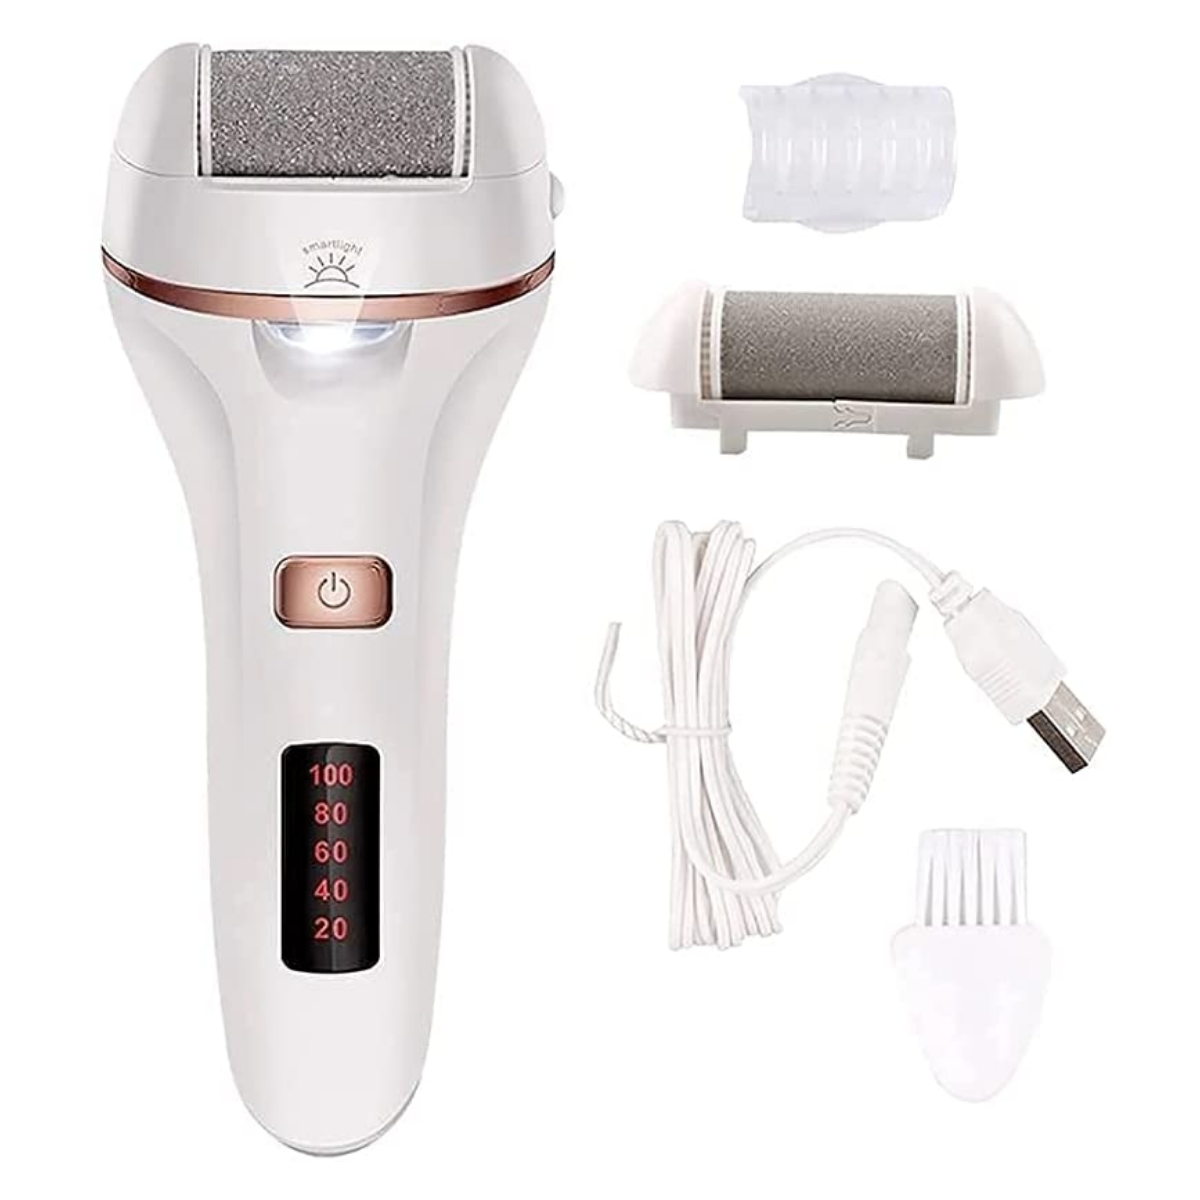 Foot Revive 2 in 1 Electric Callus Remover